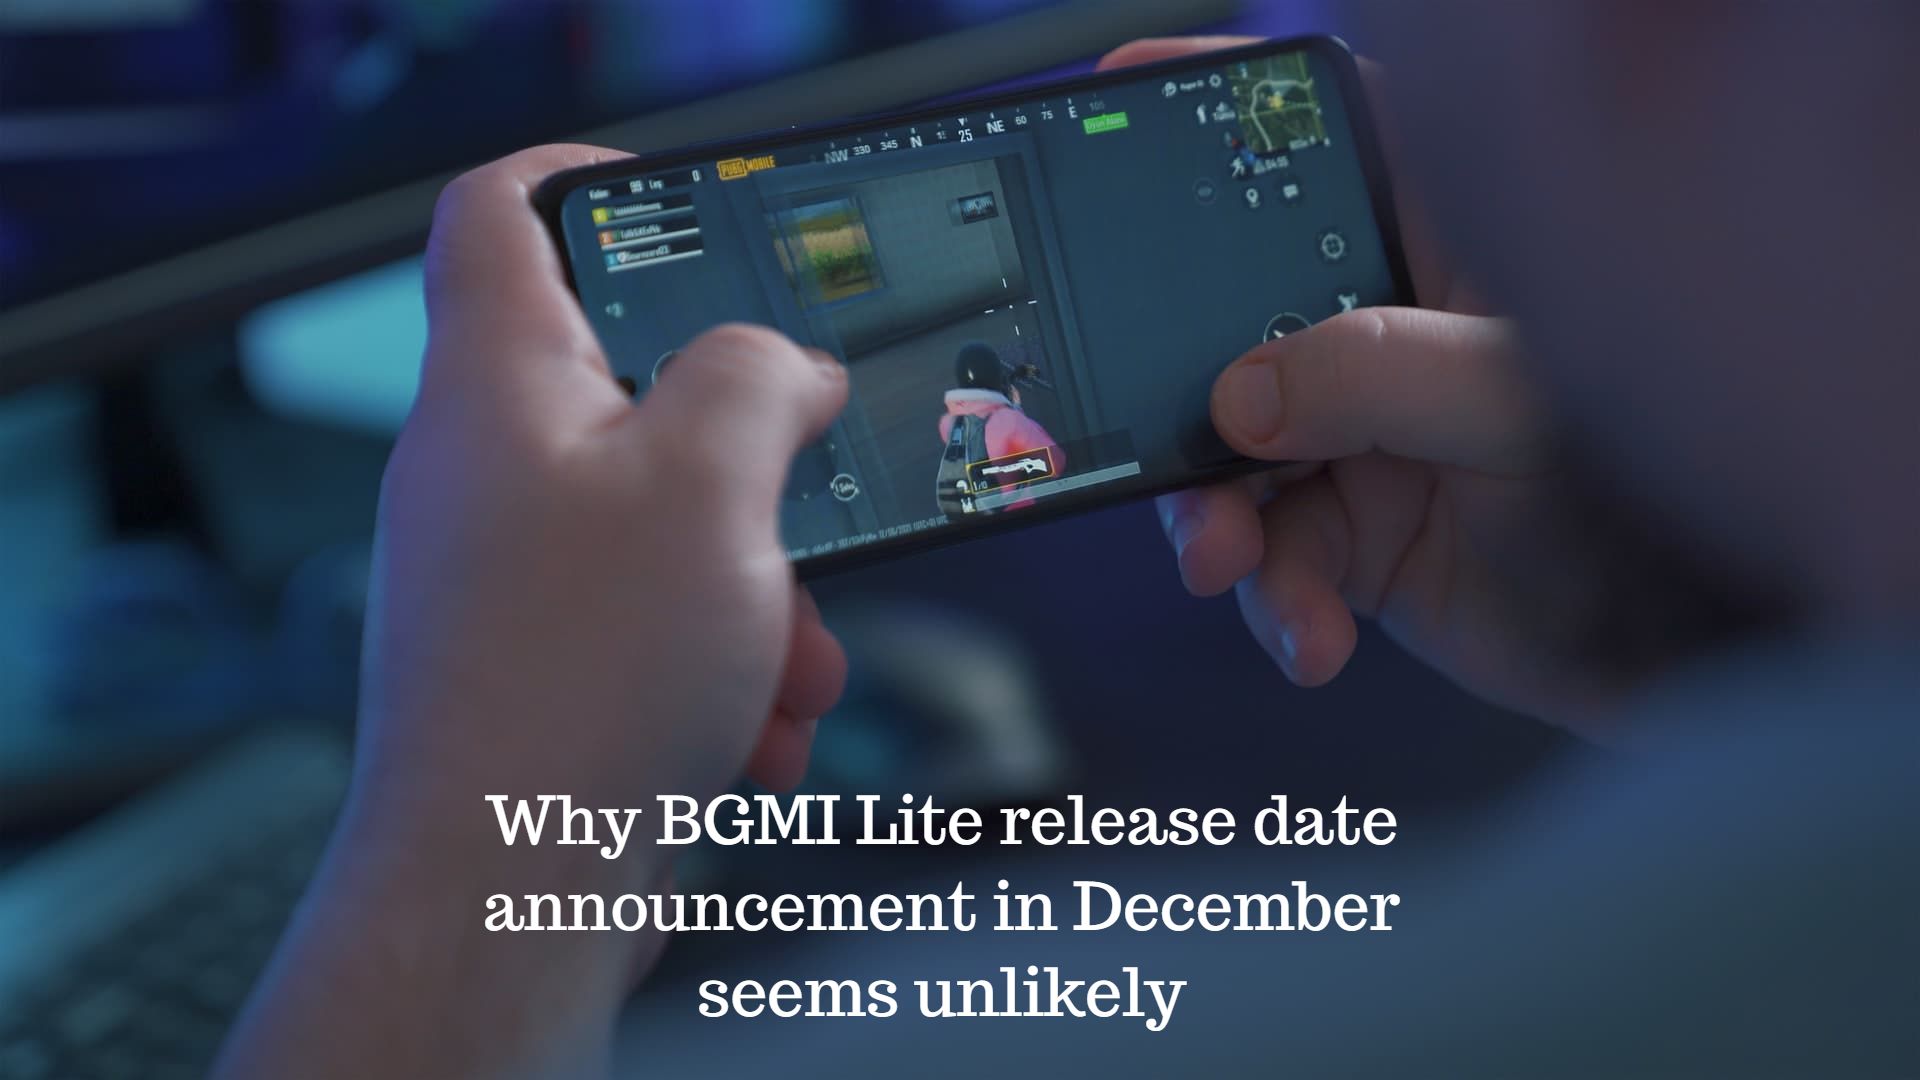 Why BGMI Lite release date announcement in December seems unlikely